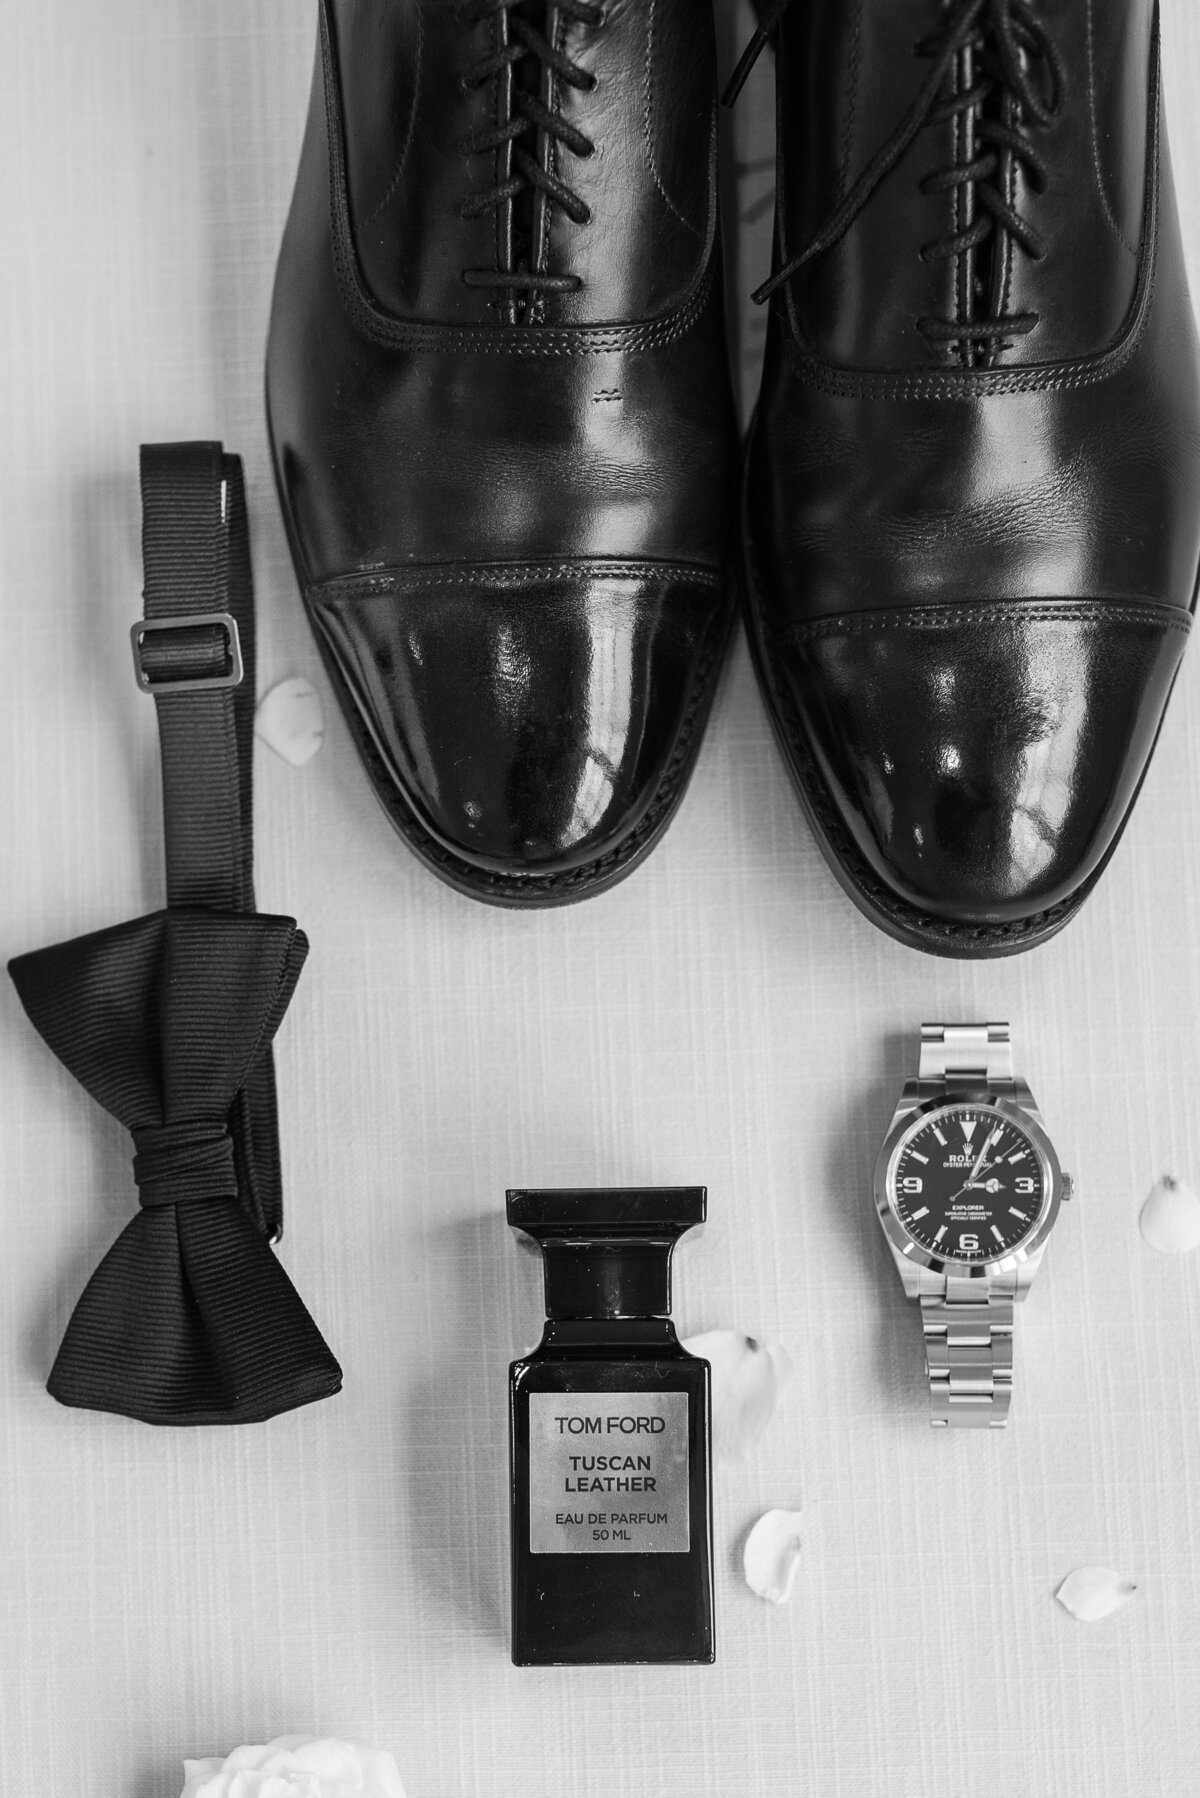 rolex bowtie tom ford cologne and groom wedding shoes